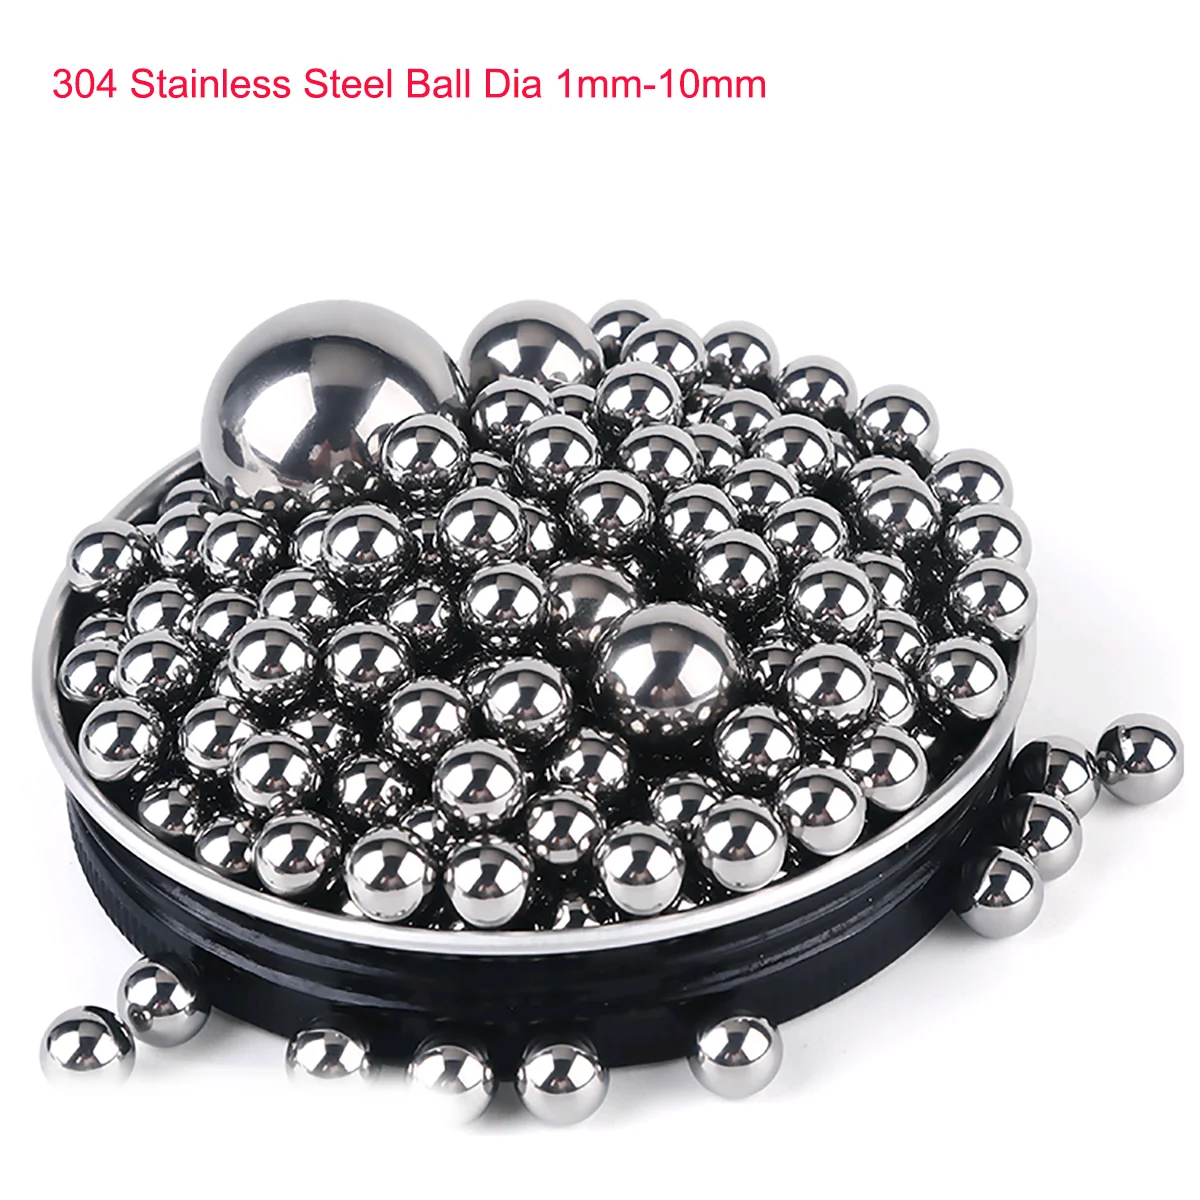 304 Stainless Steel Ball Dia 1mm Number of Pcs : 1000Pcs, Outer Diameter : 6mm 10mm High Precision Bearing Balls Smooth Ball Bearing 